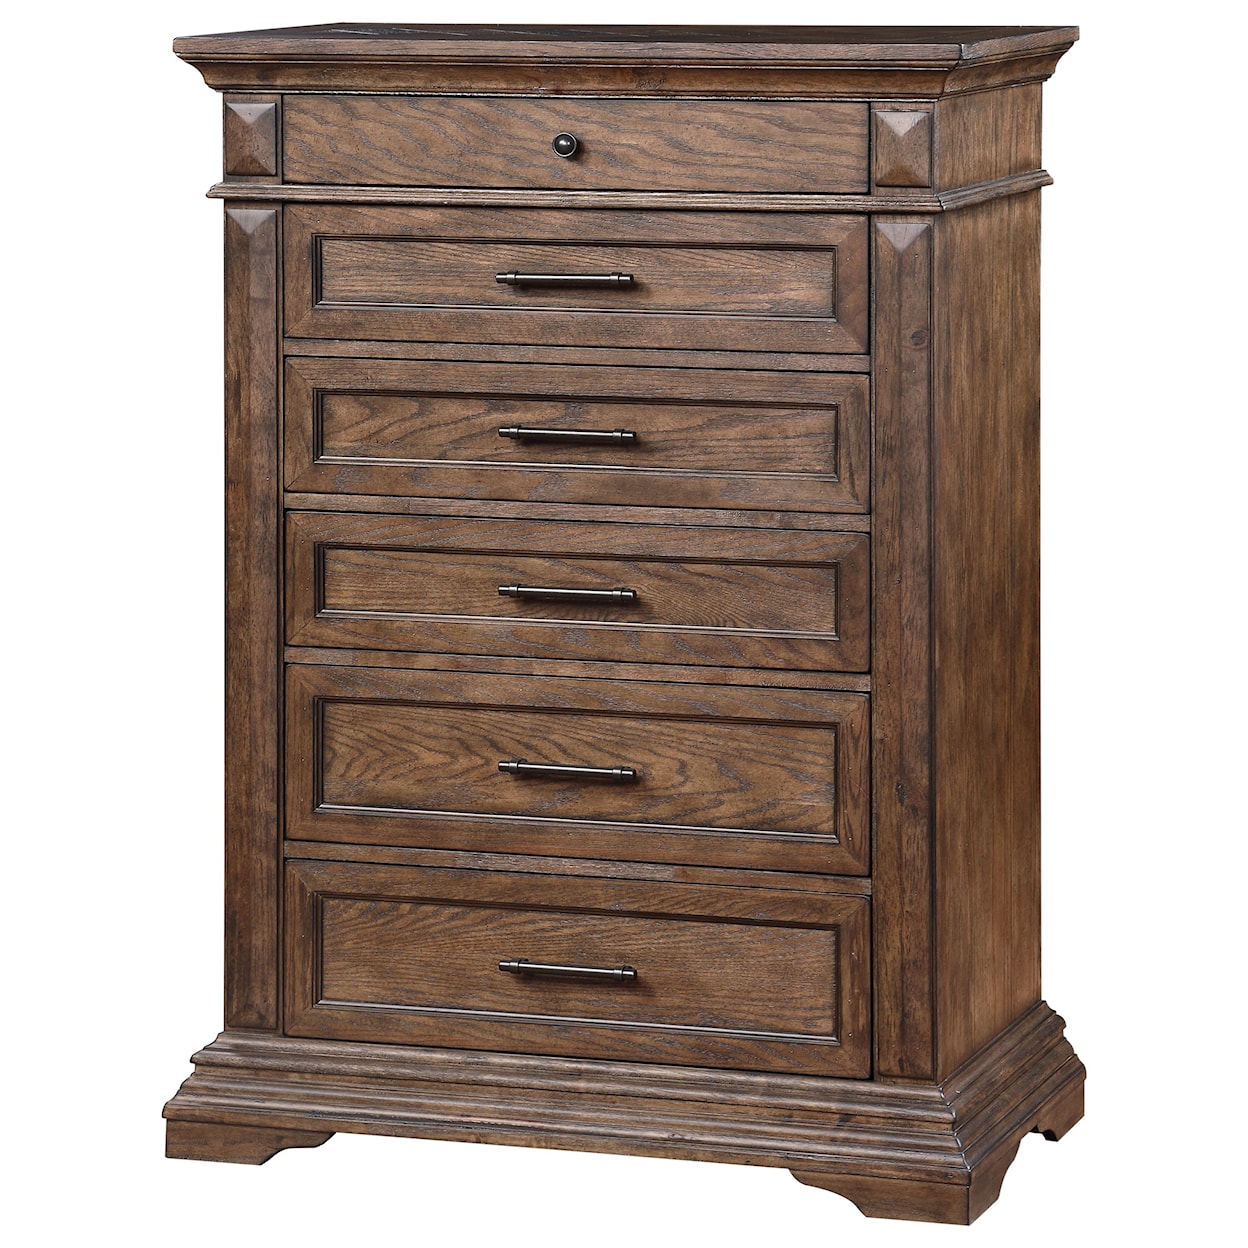 New Classic Furniture Mar Vista Chest of Drawers